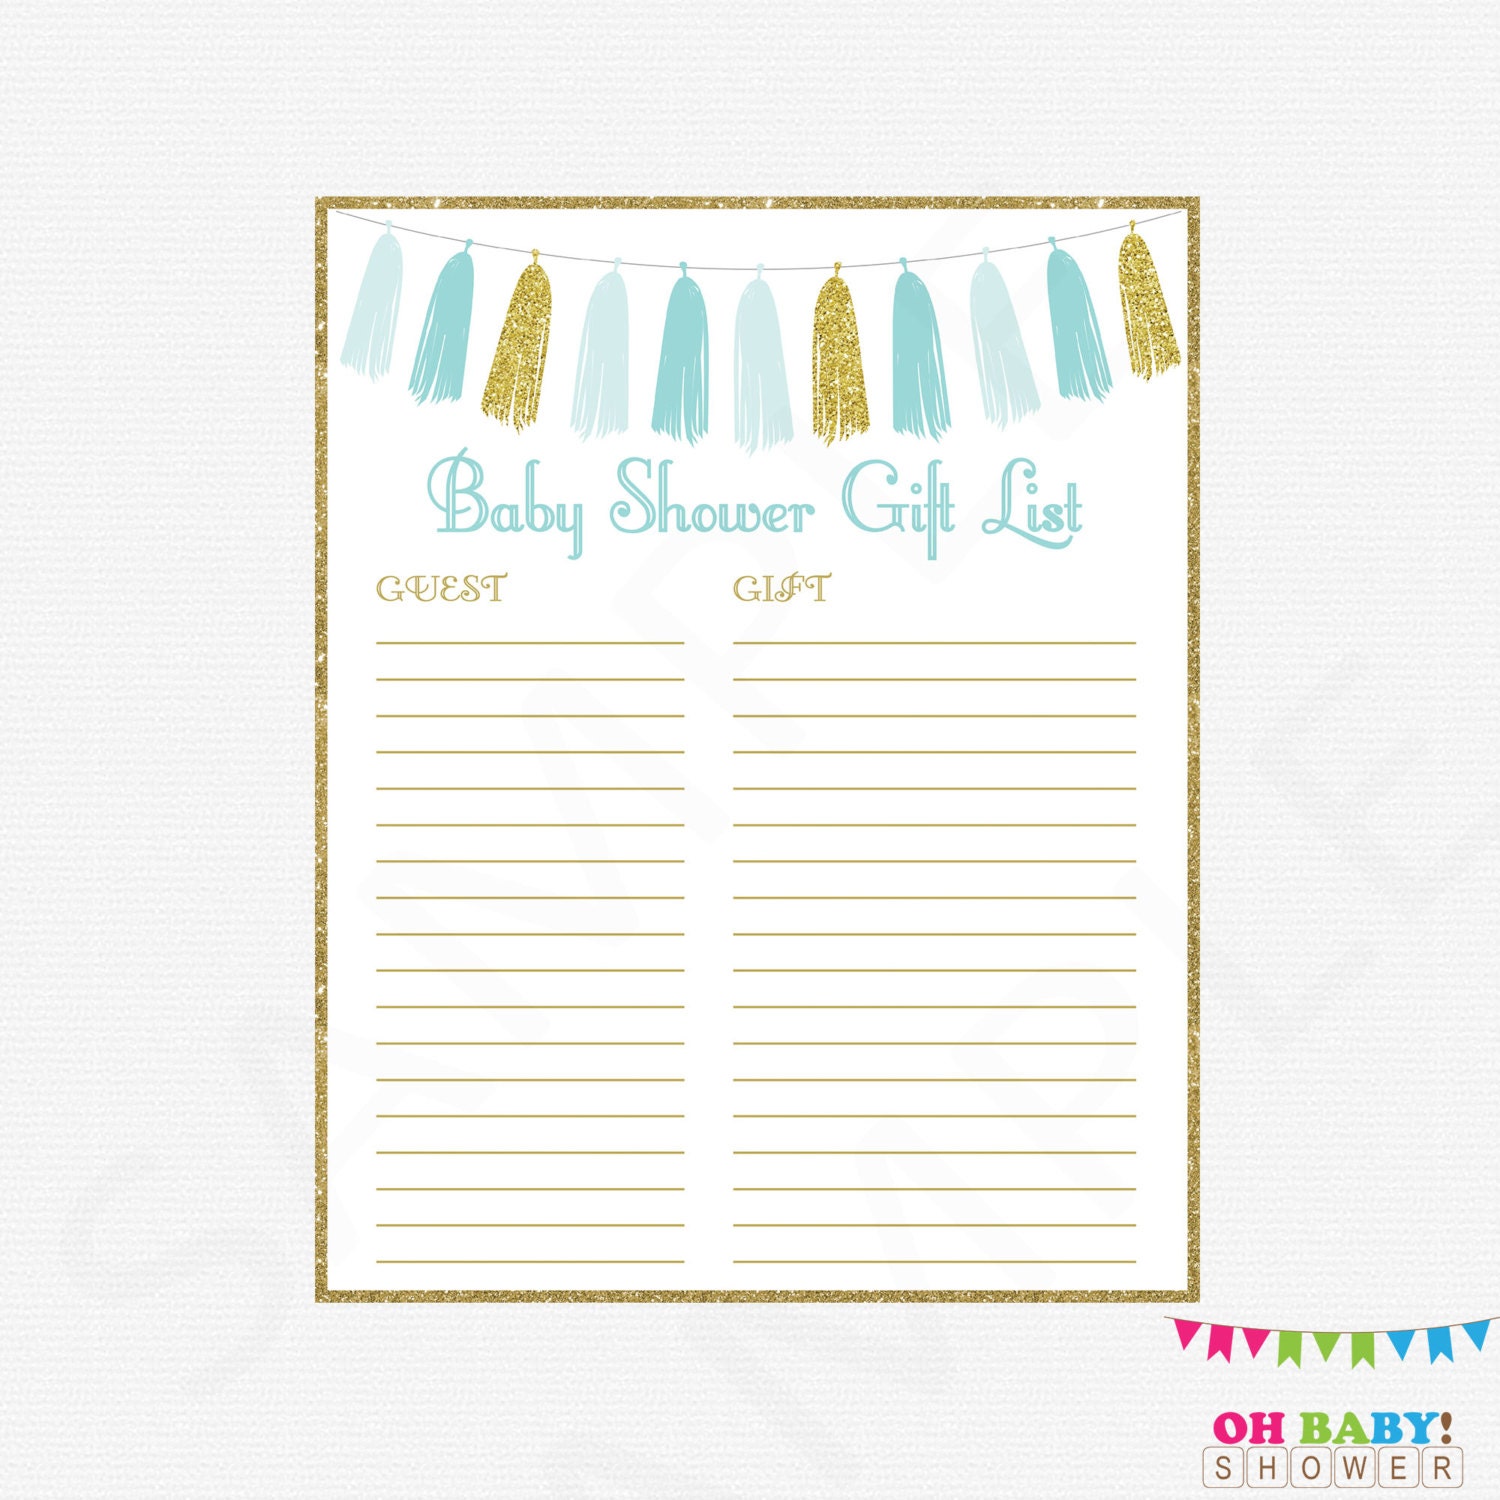 printable-gift-list-boy-baby-shower-guest-sign-in-sheet